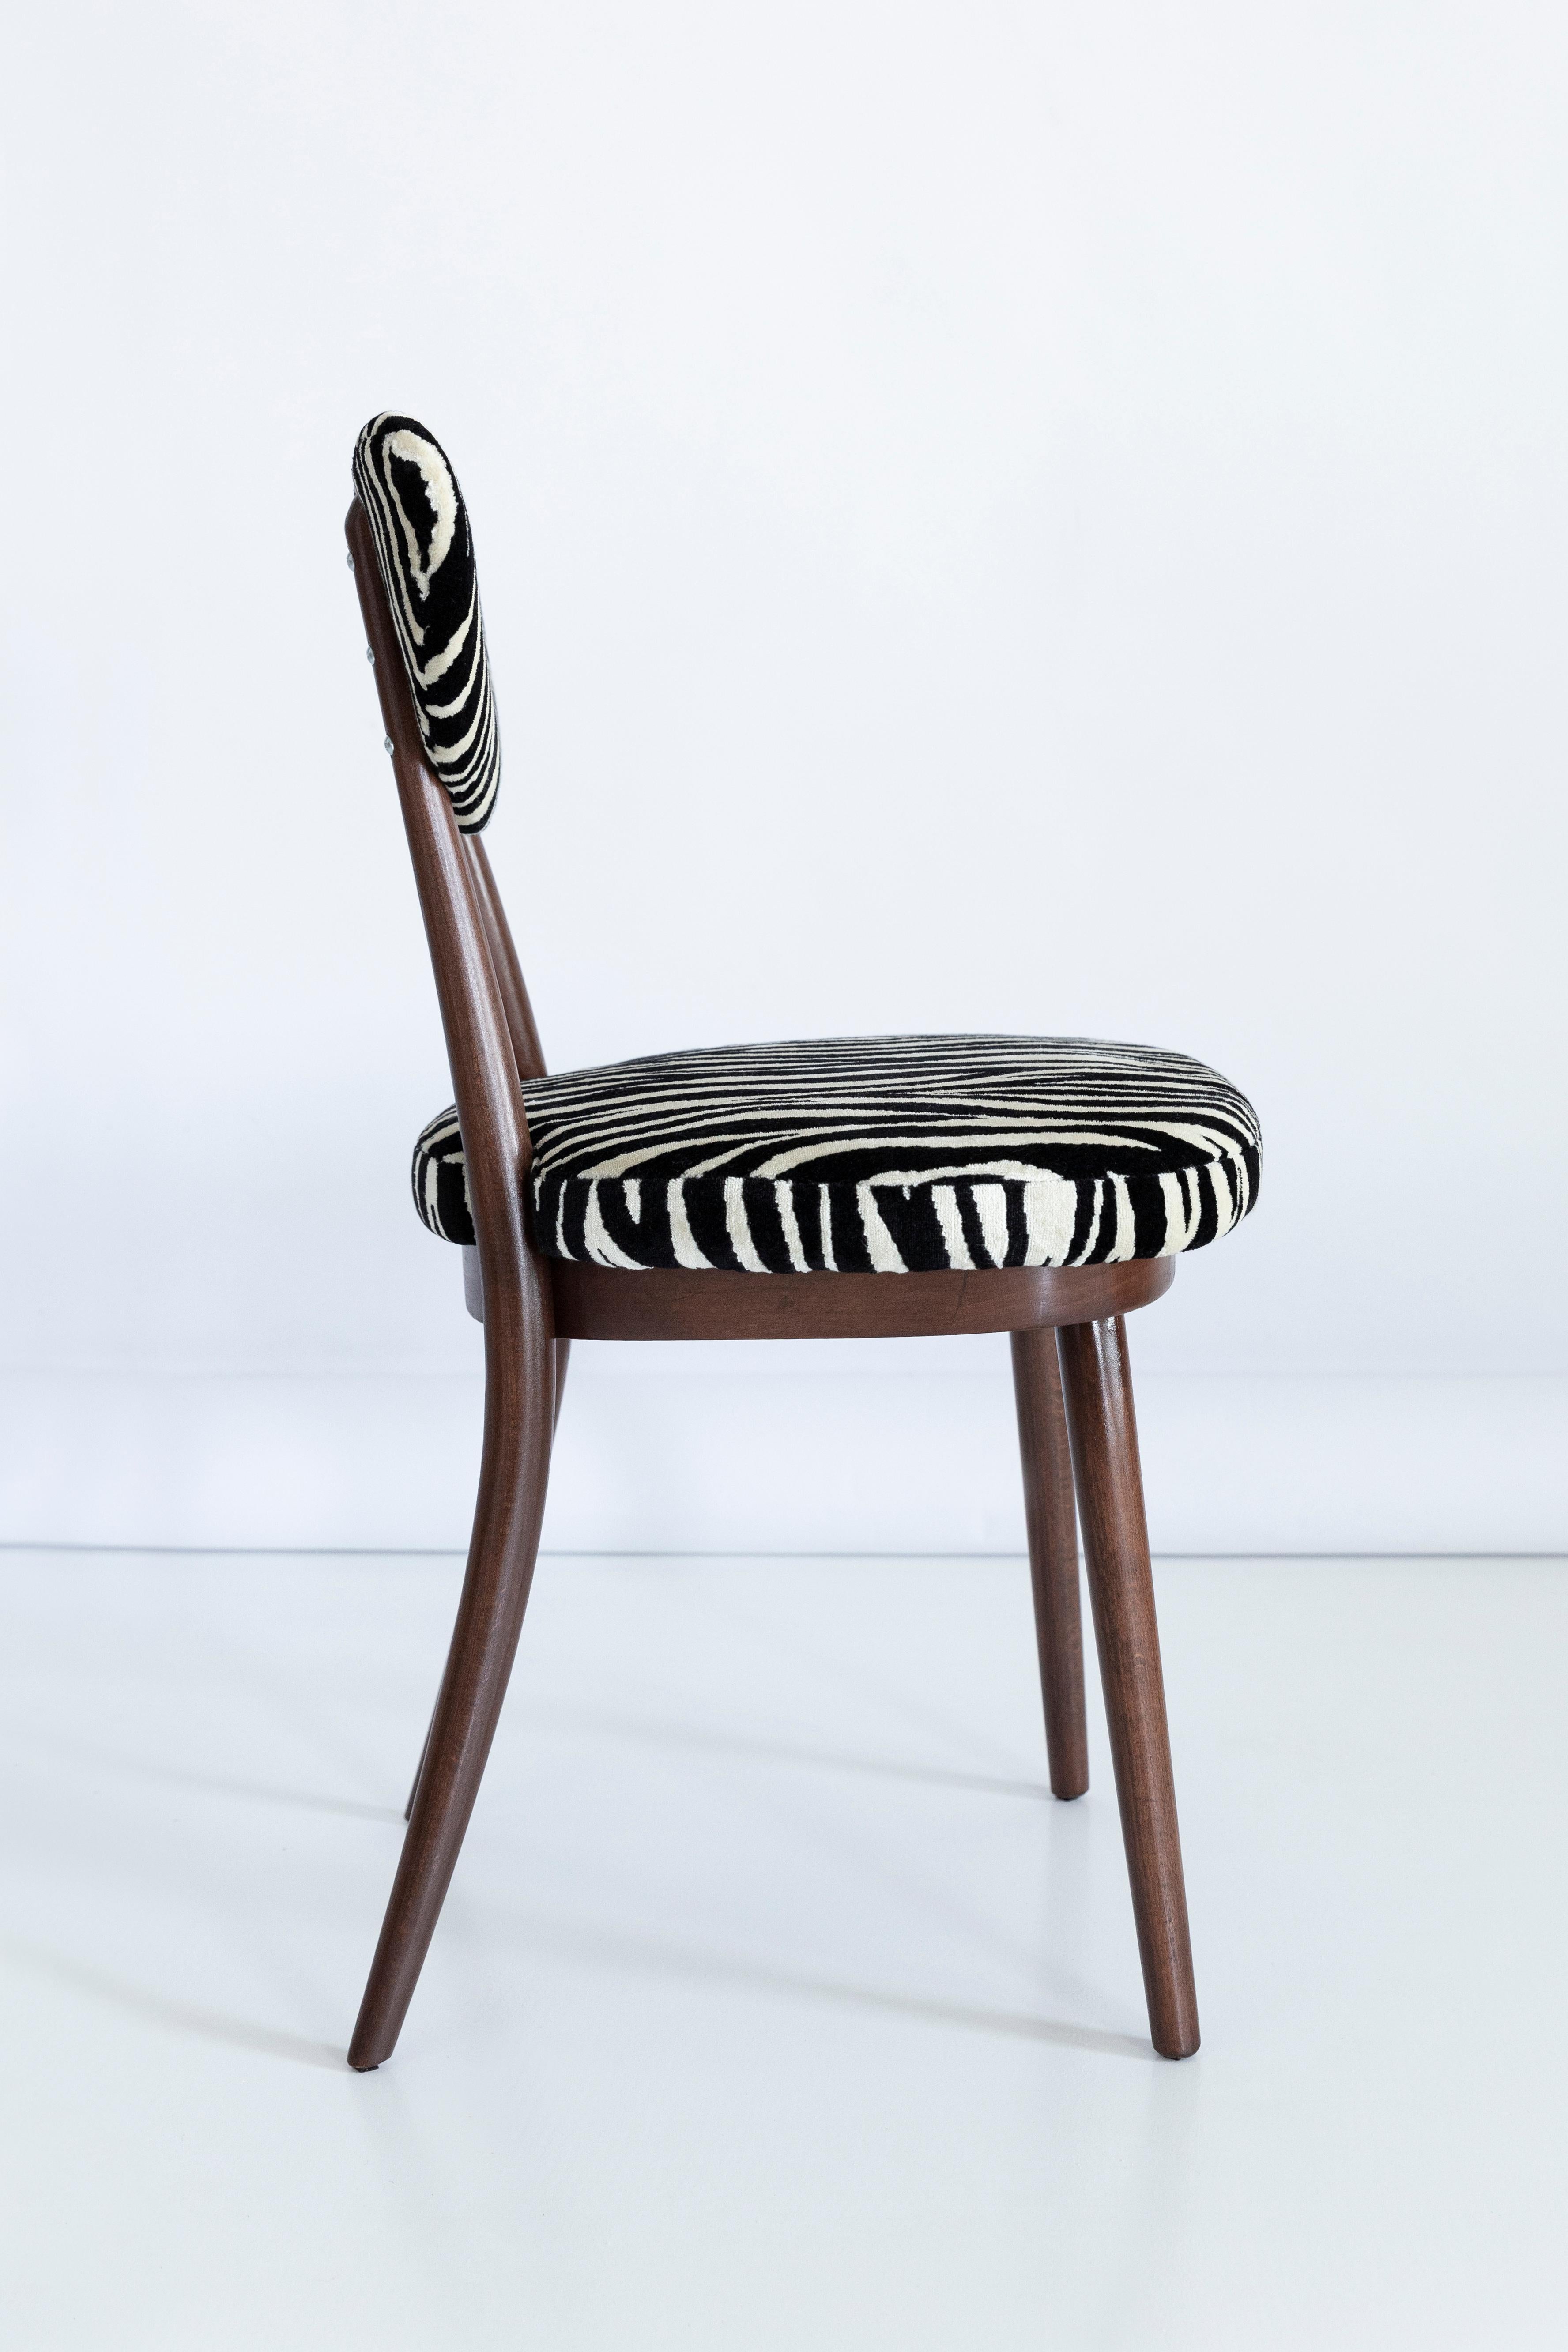 Set of Six Midcentury Zebra Black and White Heart Chairs, Poland, 1960s For Sale 8